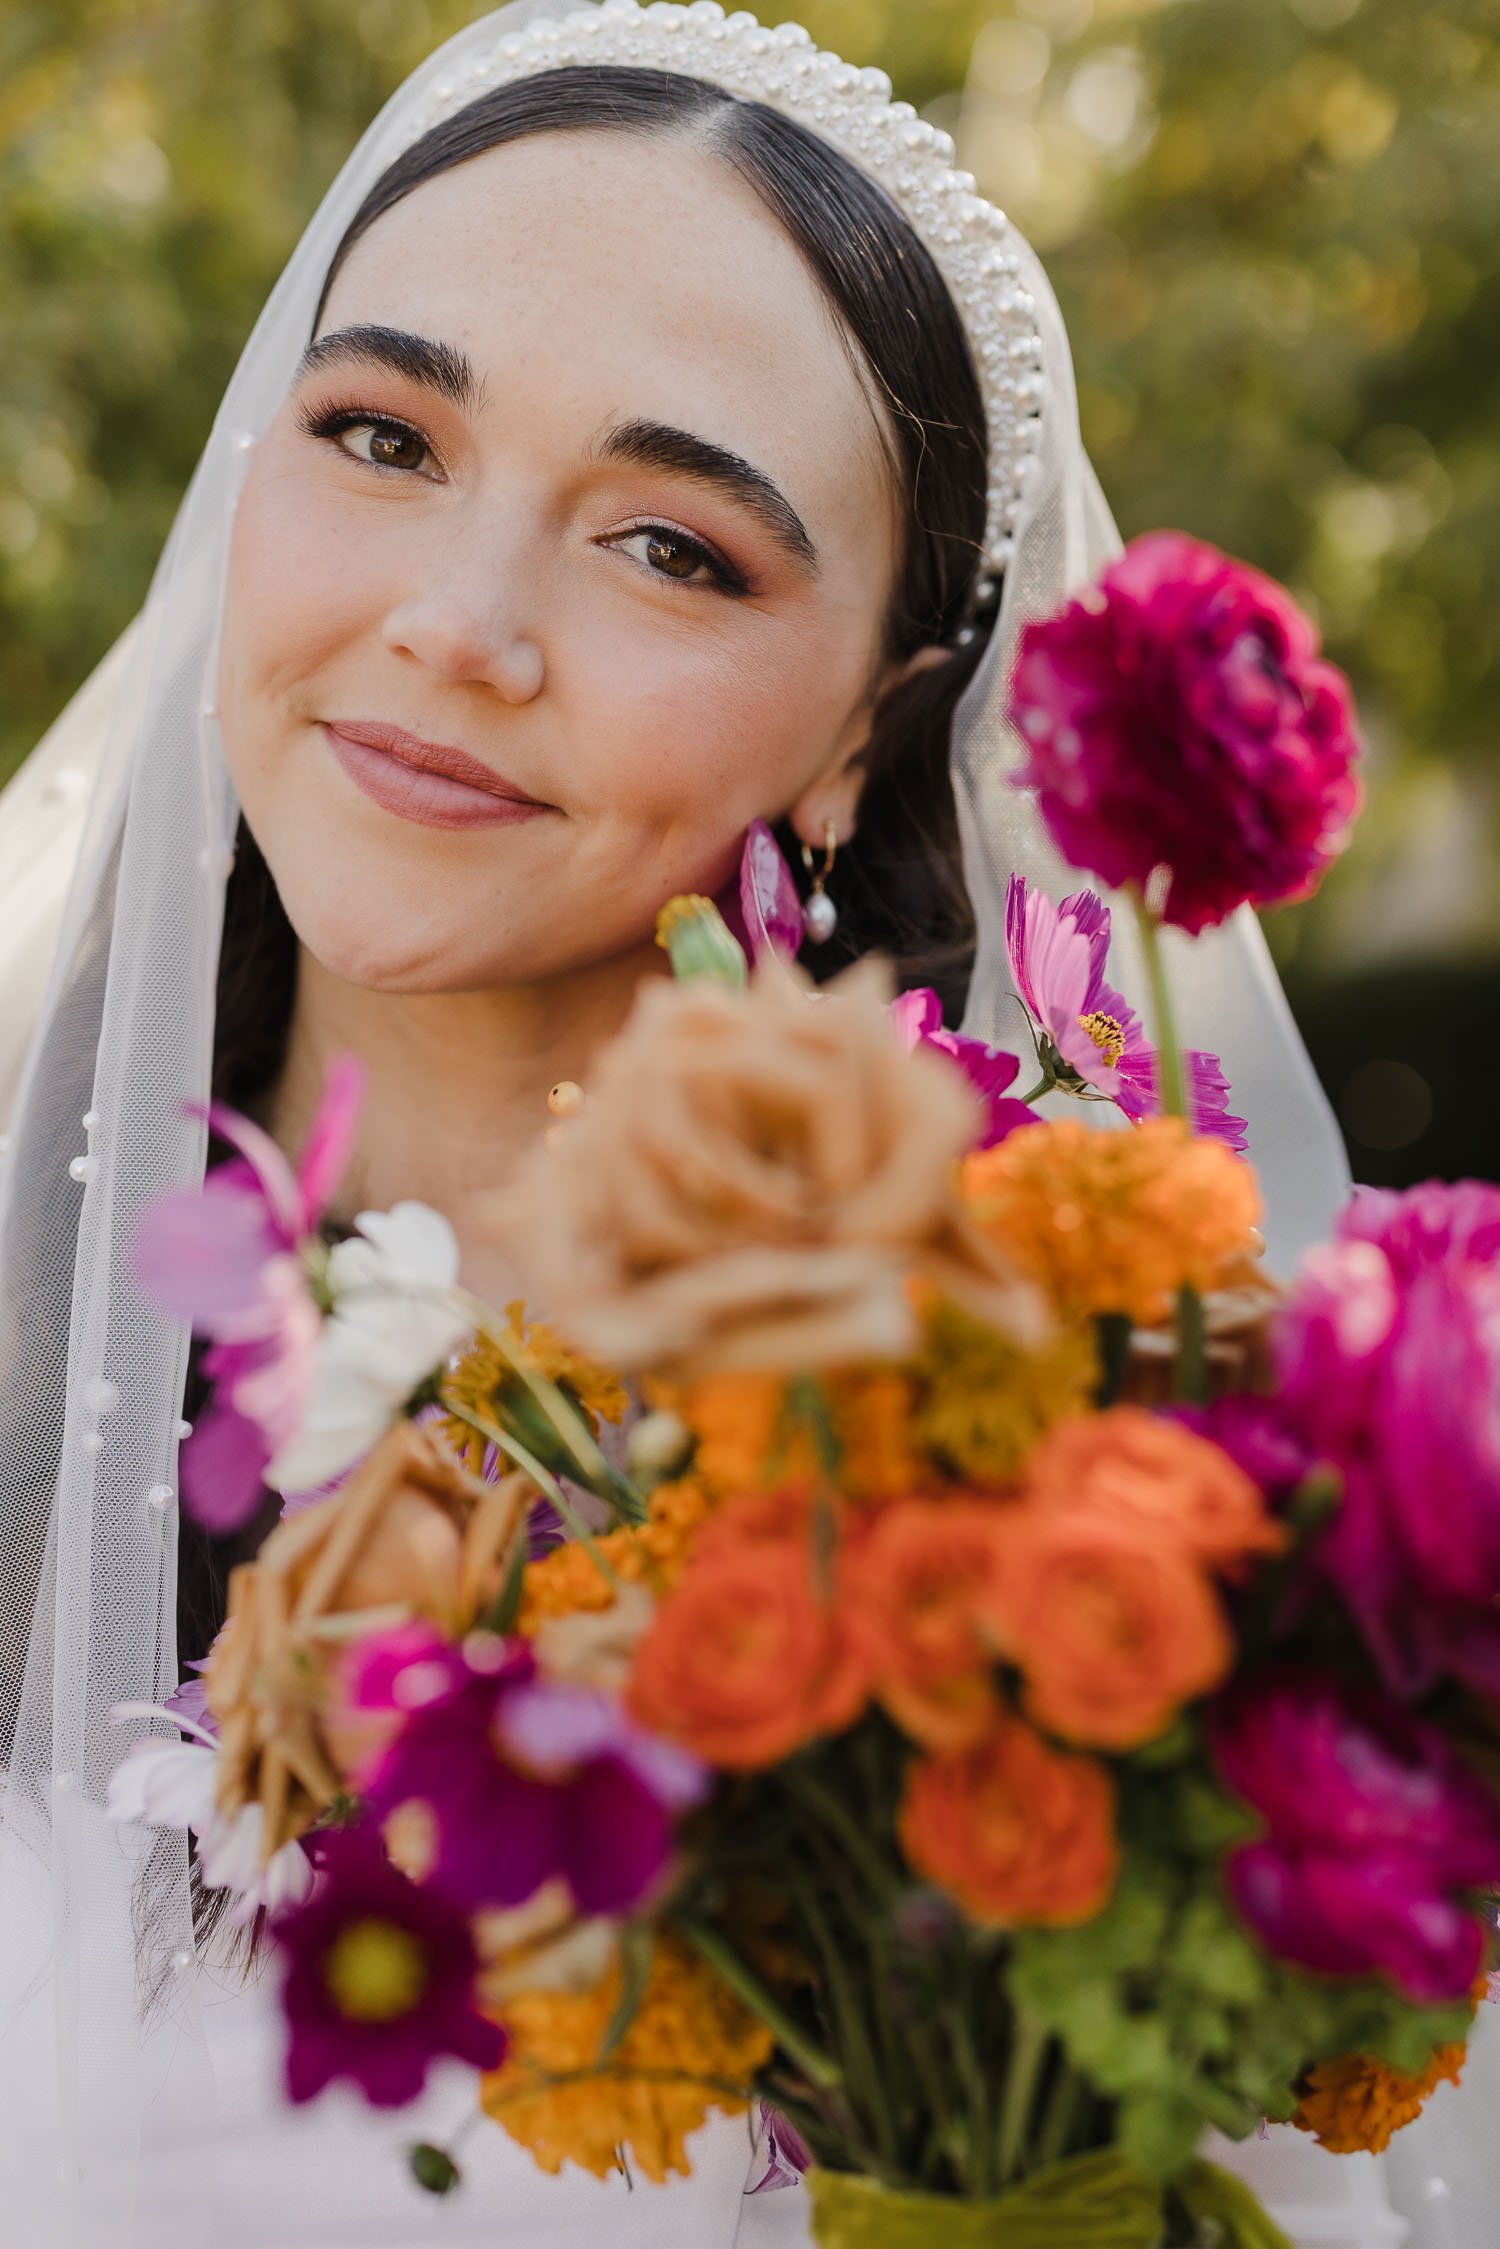 Bride in pearl bridal headband with colorful bouquet by Flowerchild Florals